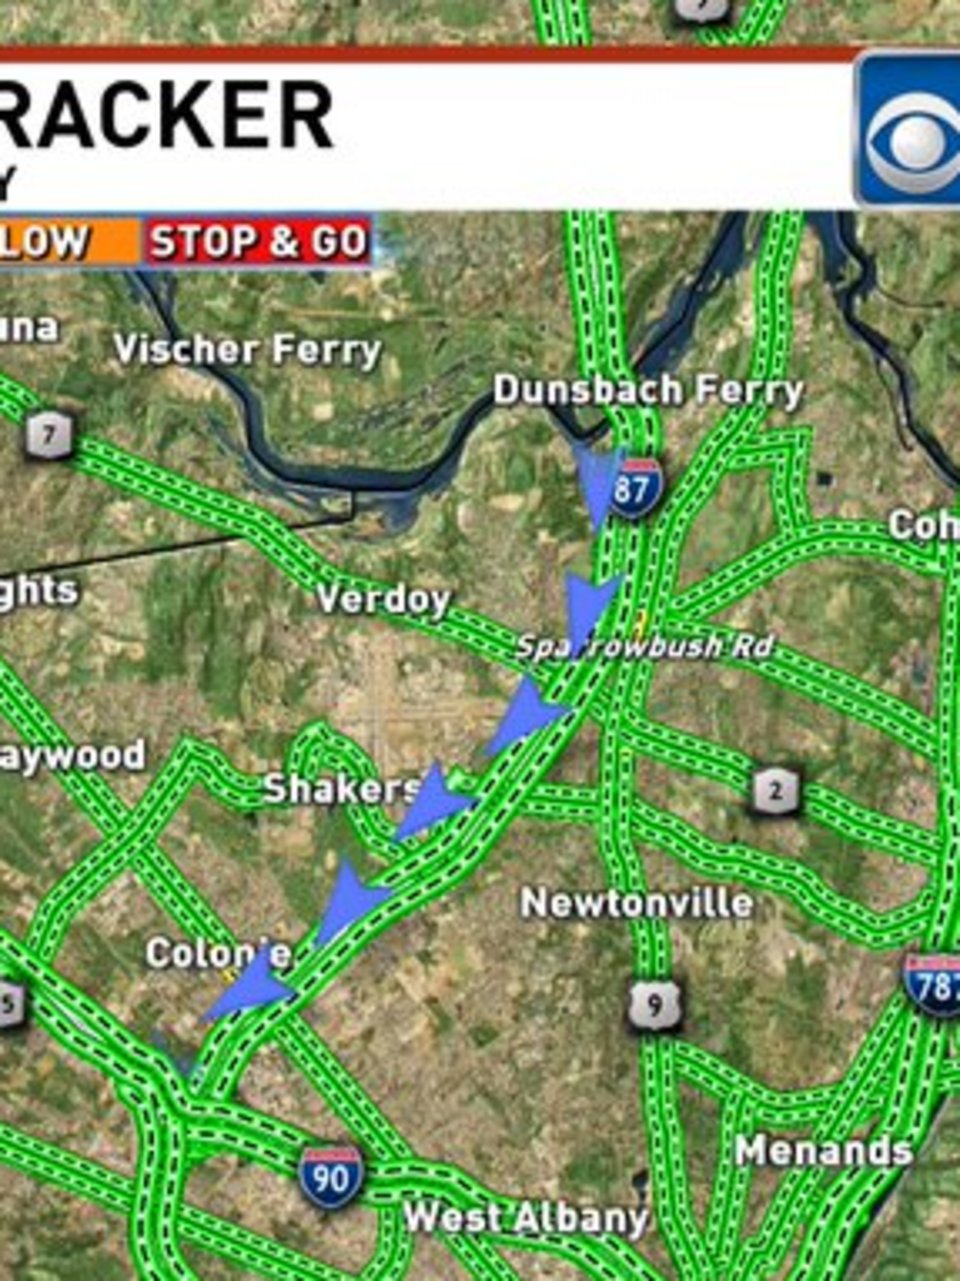 Dot Patches Potholes On Northway Expect Rolling Lane Closures Wrgb